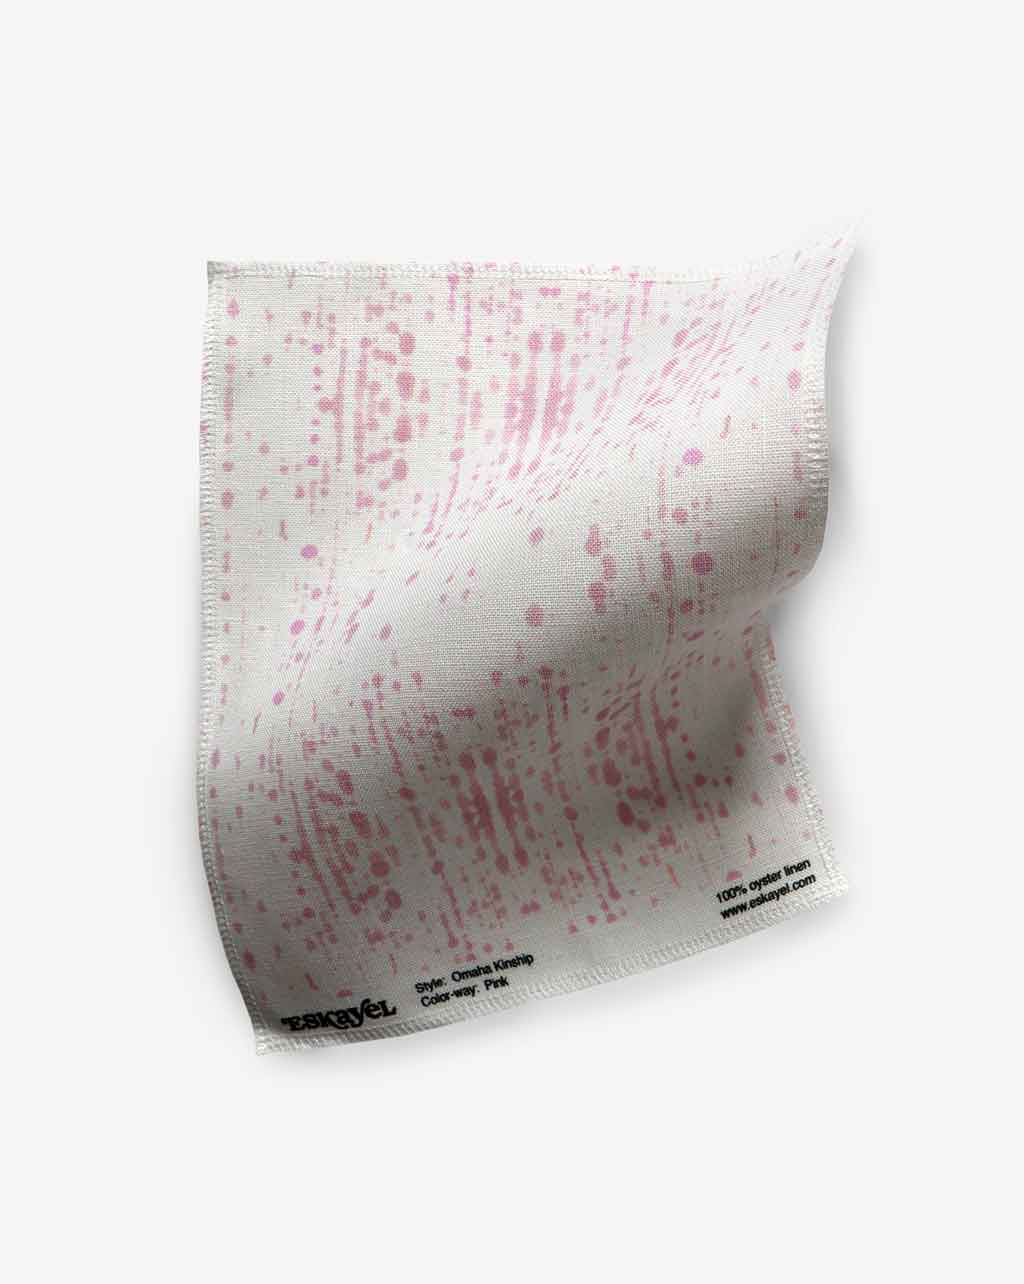 A Omaha Kinship Fabric Pink fabric with dots on it